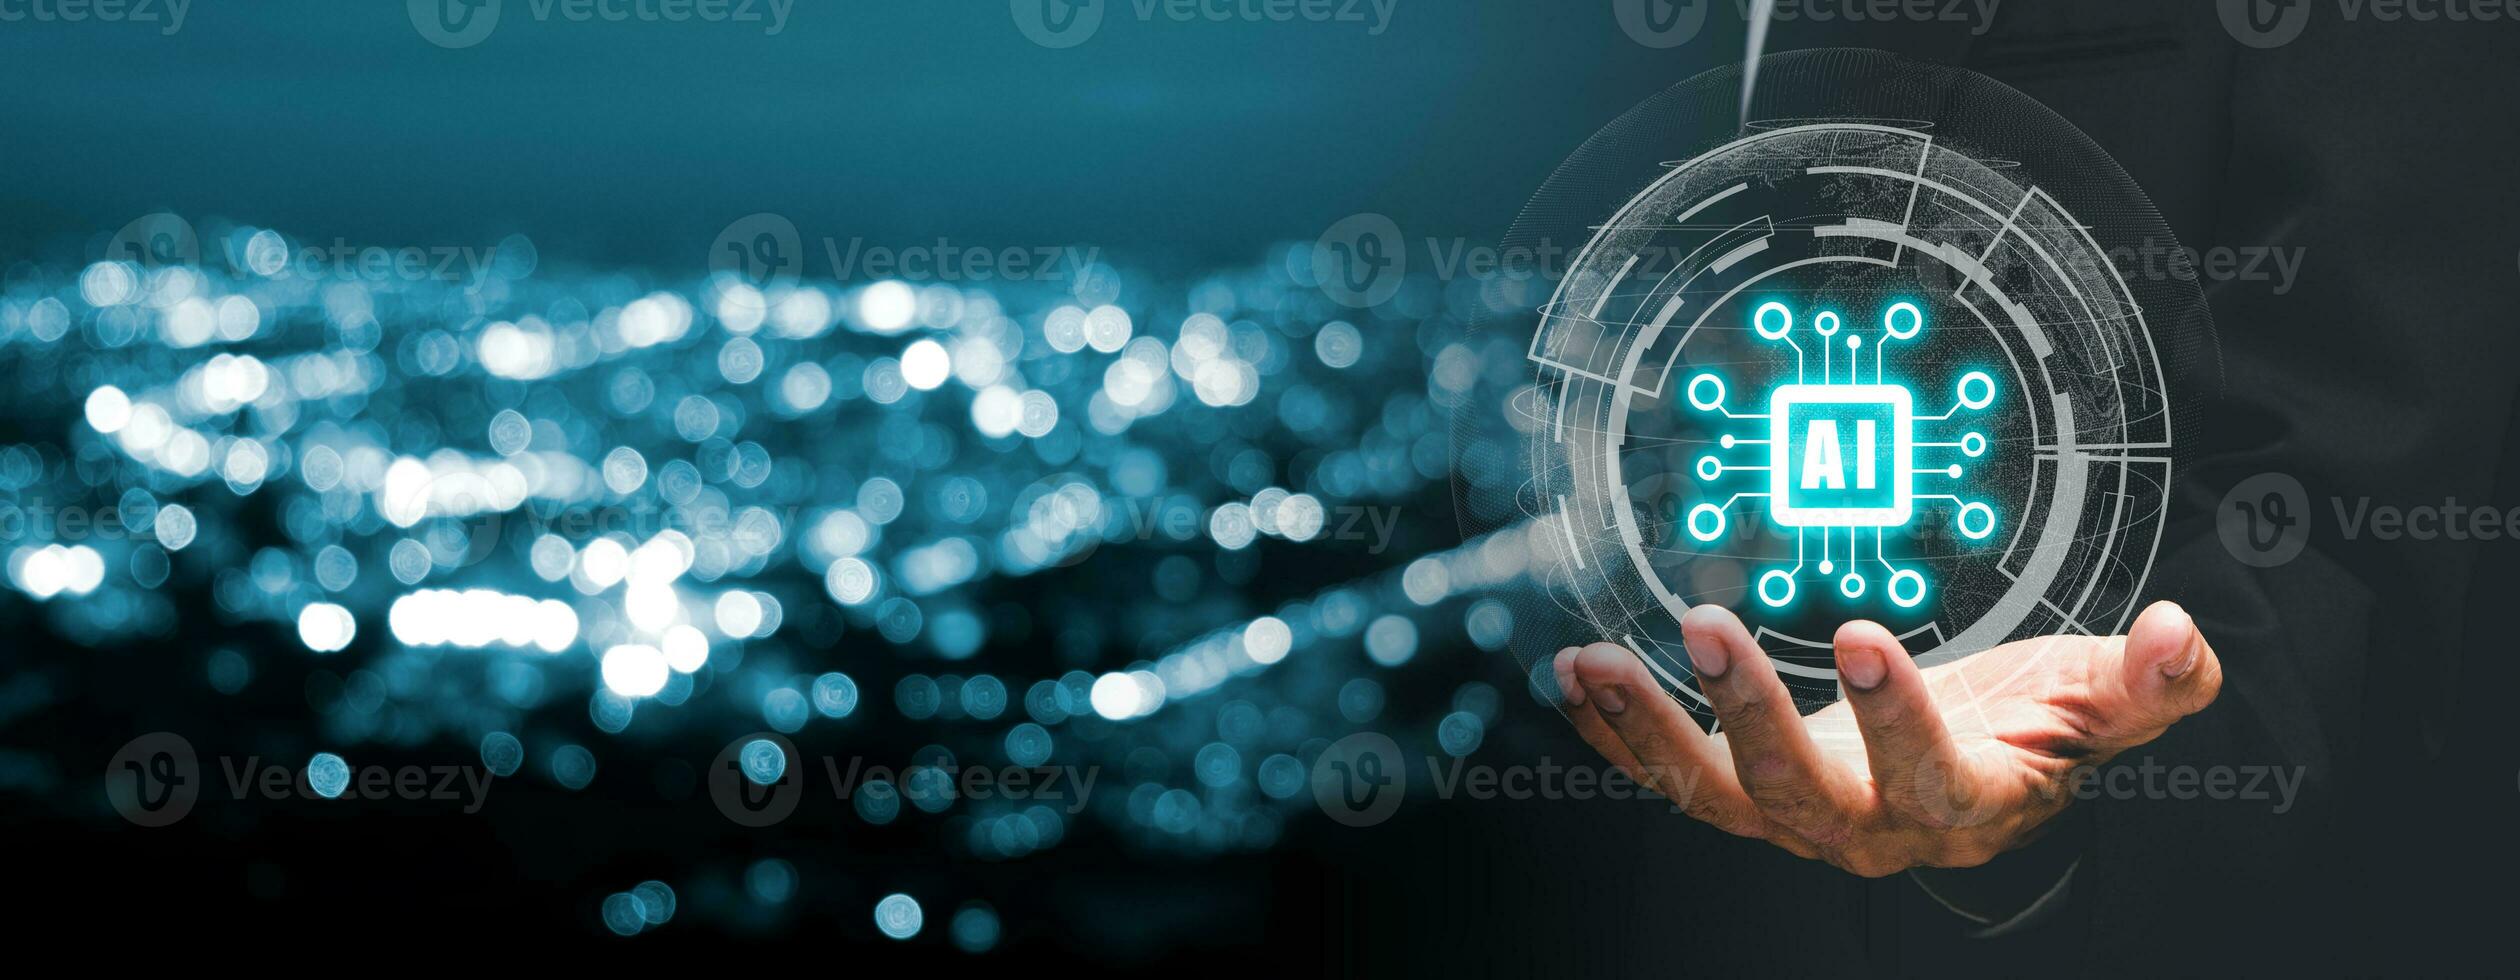 Artificial Intelligence AI, Person hand holding holographic brain Artificial Intelligence icon from the screen, Internet of Things IoT concept. photo